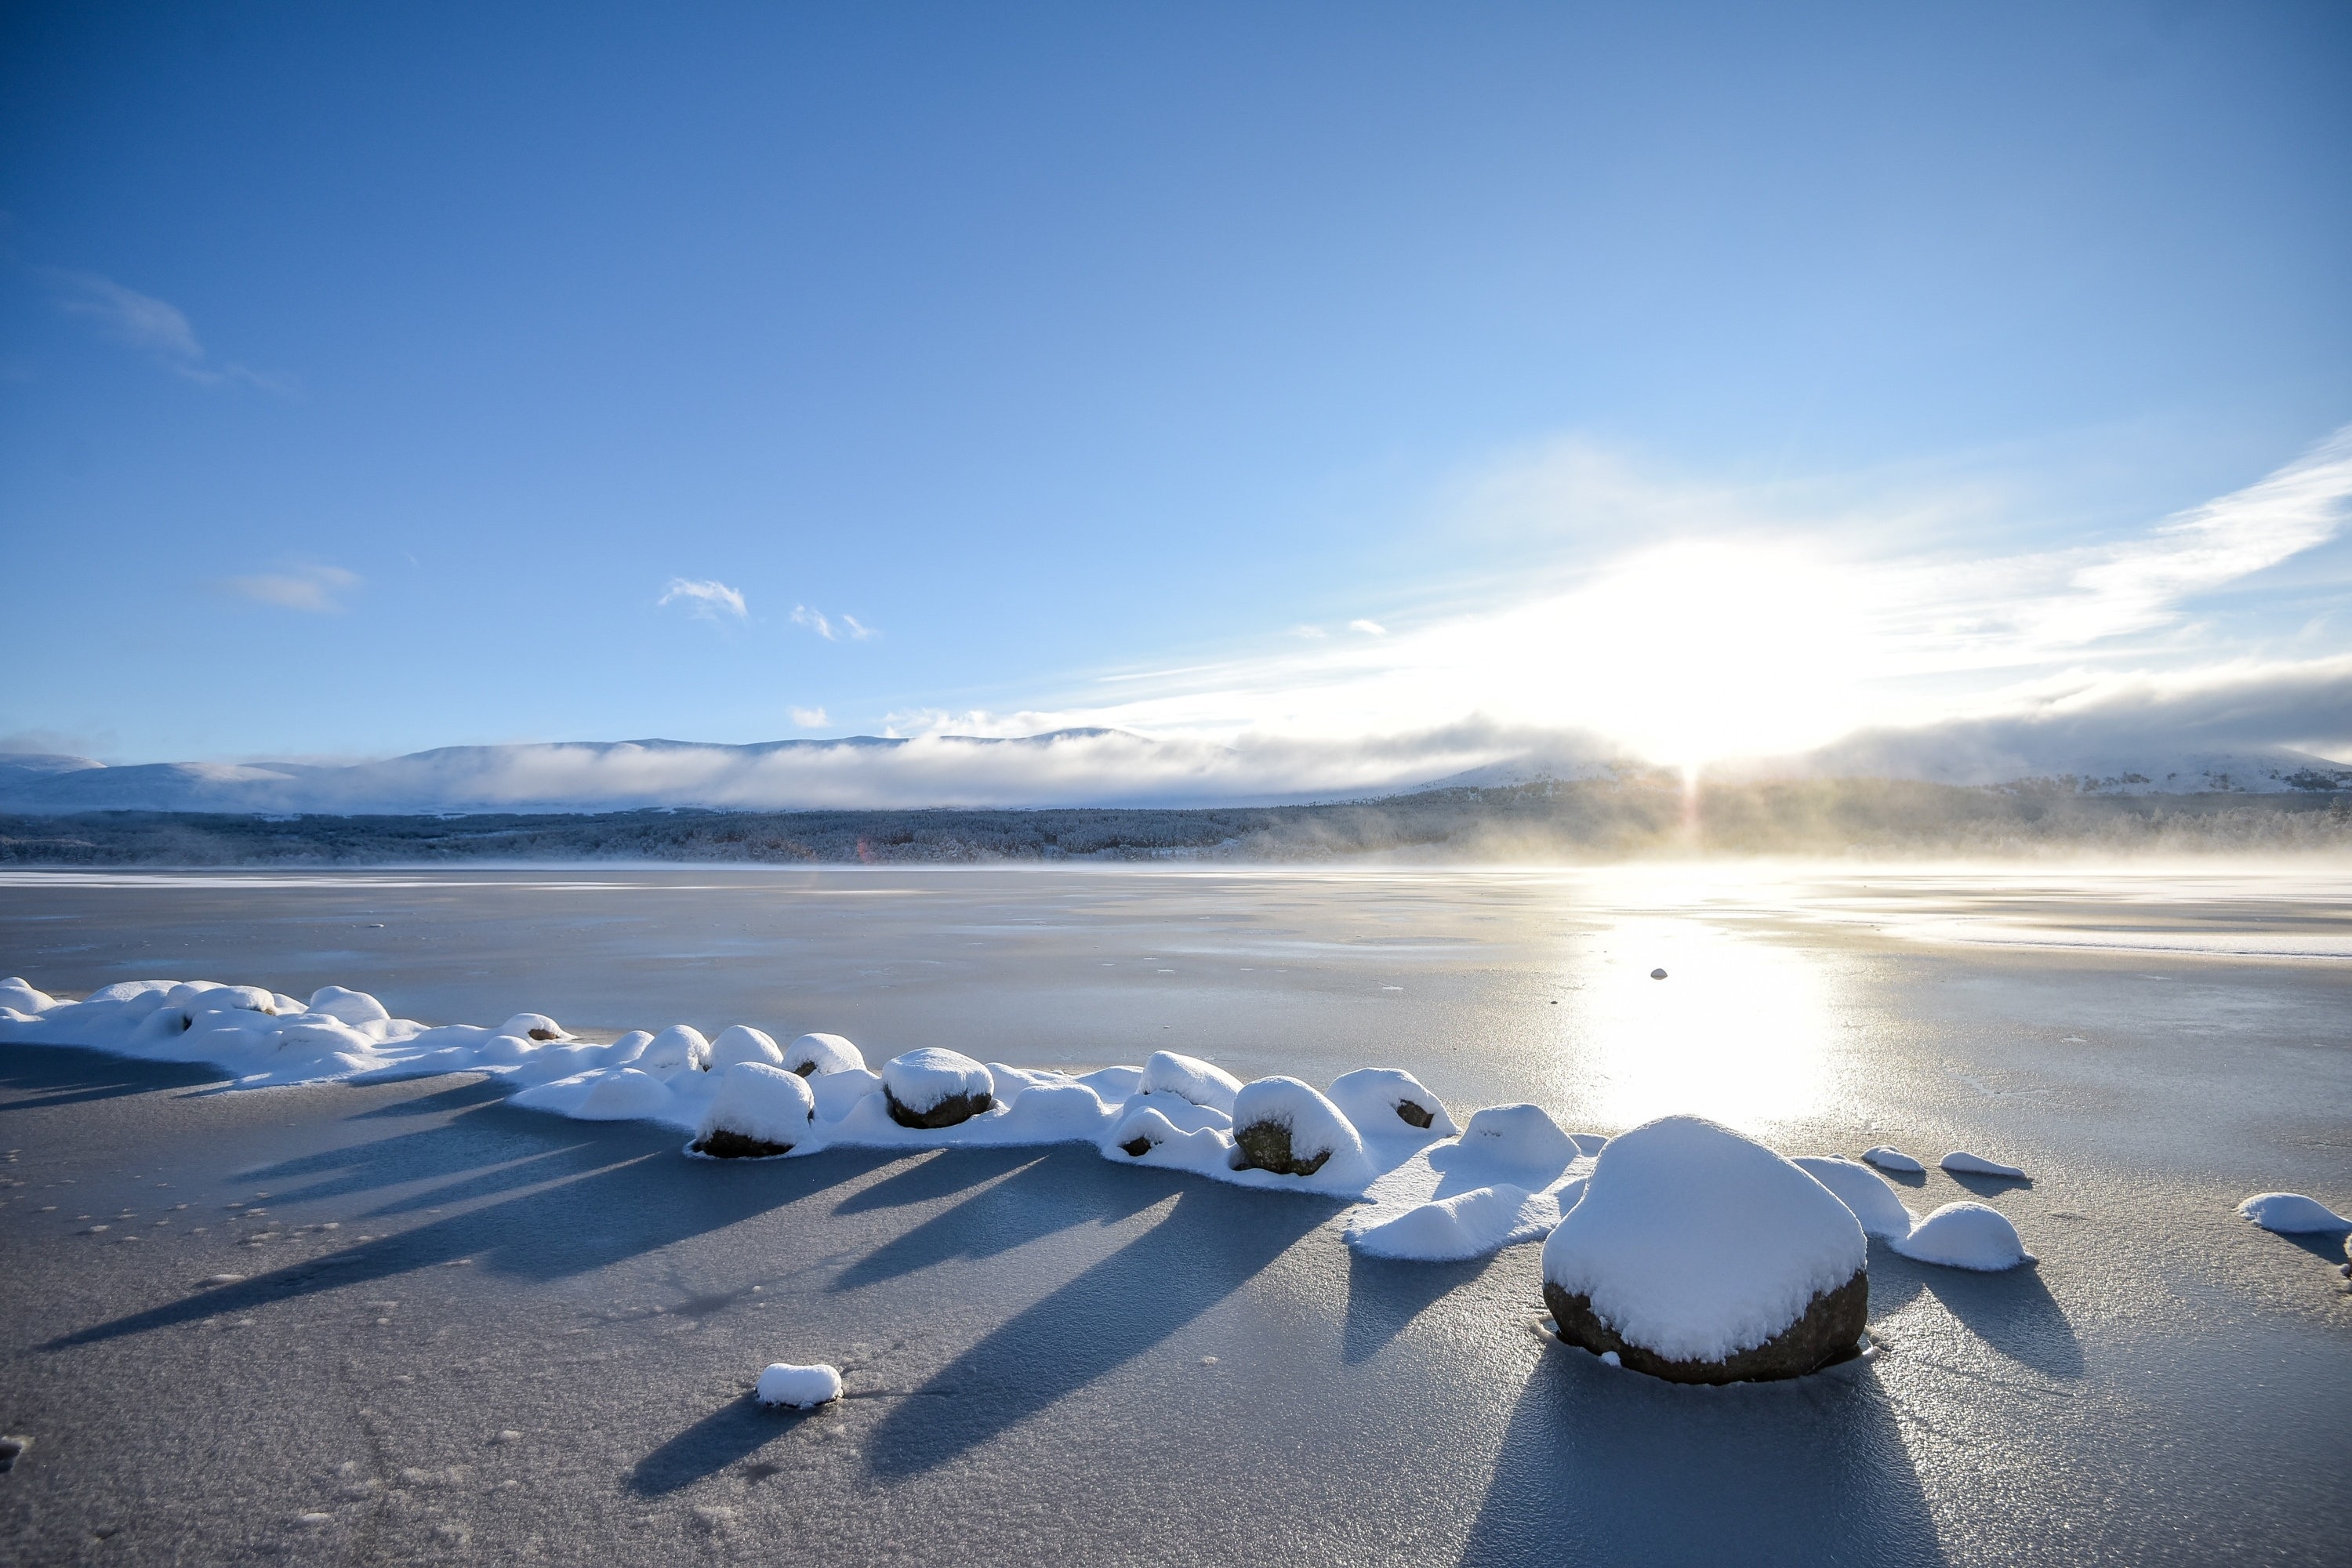 Snow covered rocks sit in a partially frozen Loch Morlich near Aviemore, Scotland on December 14 2015. Last night, Sunday, Scotland's coldest temperature for this Winter was recorded in Dalwhinnie at -8.7C. Up to 15cm of snow fell in Aviemore overnight and local schools were closed.